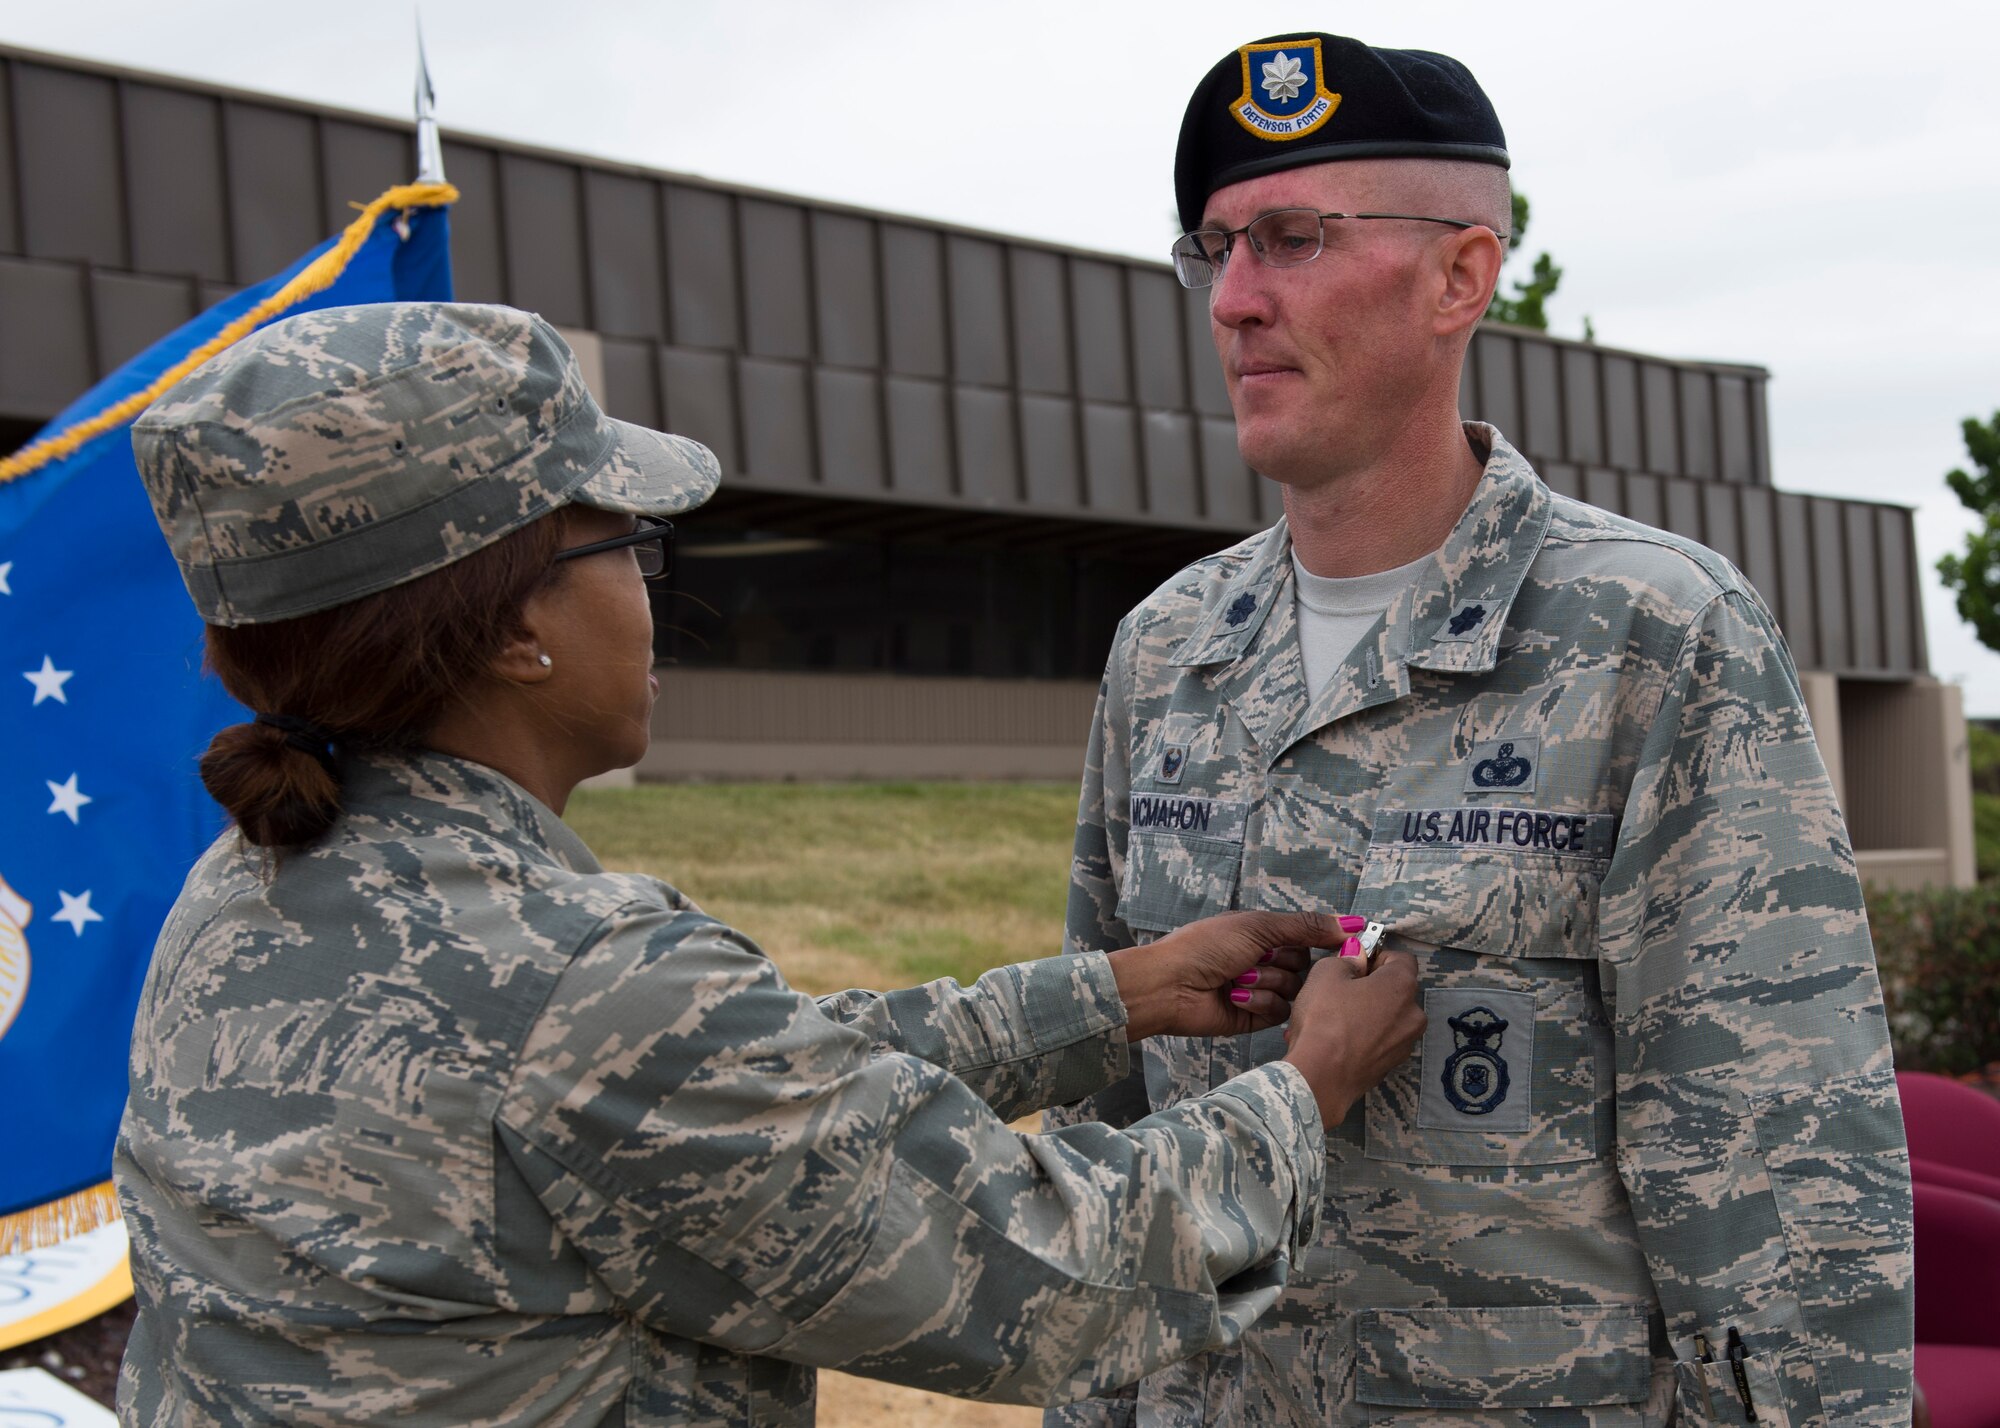 Col. Yvonne Spencer, 92nd Mission Support Group commander, pins a Meritorious Service Medal, 2nd Oak Leaf Cluster, to the uniform of Lt. Col. Kevin McMahon during the 92nd Security Forces Squadron change of command ceremony June 8, 2017, at Fairchild Air Force, Washington. McMahon led his team of defenders to assist Fairchild AFB in being awarded the Omaha Trophy Award and his leadership allowed the 92nd SFS to earn the distinction of Air Force's Best Small Security Forces Squadron Award.
(U.S. Air Force Photo / Airman 1st Class Ryan Lackey)